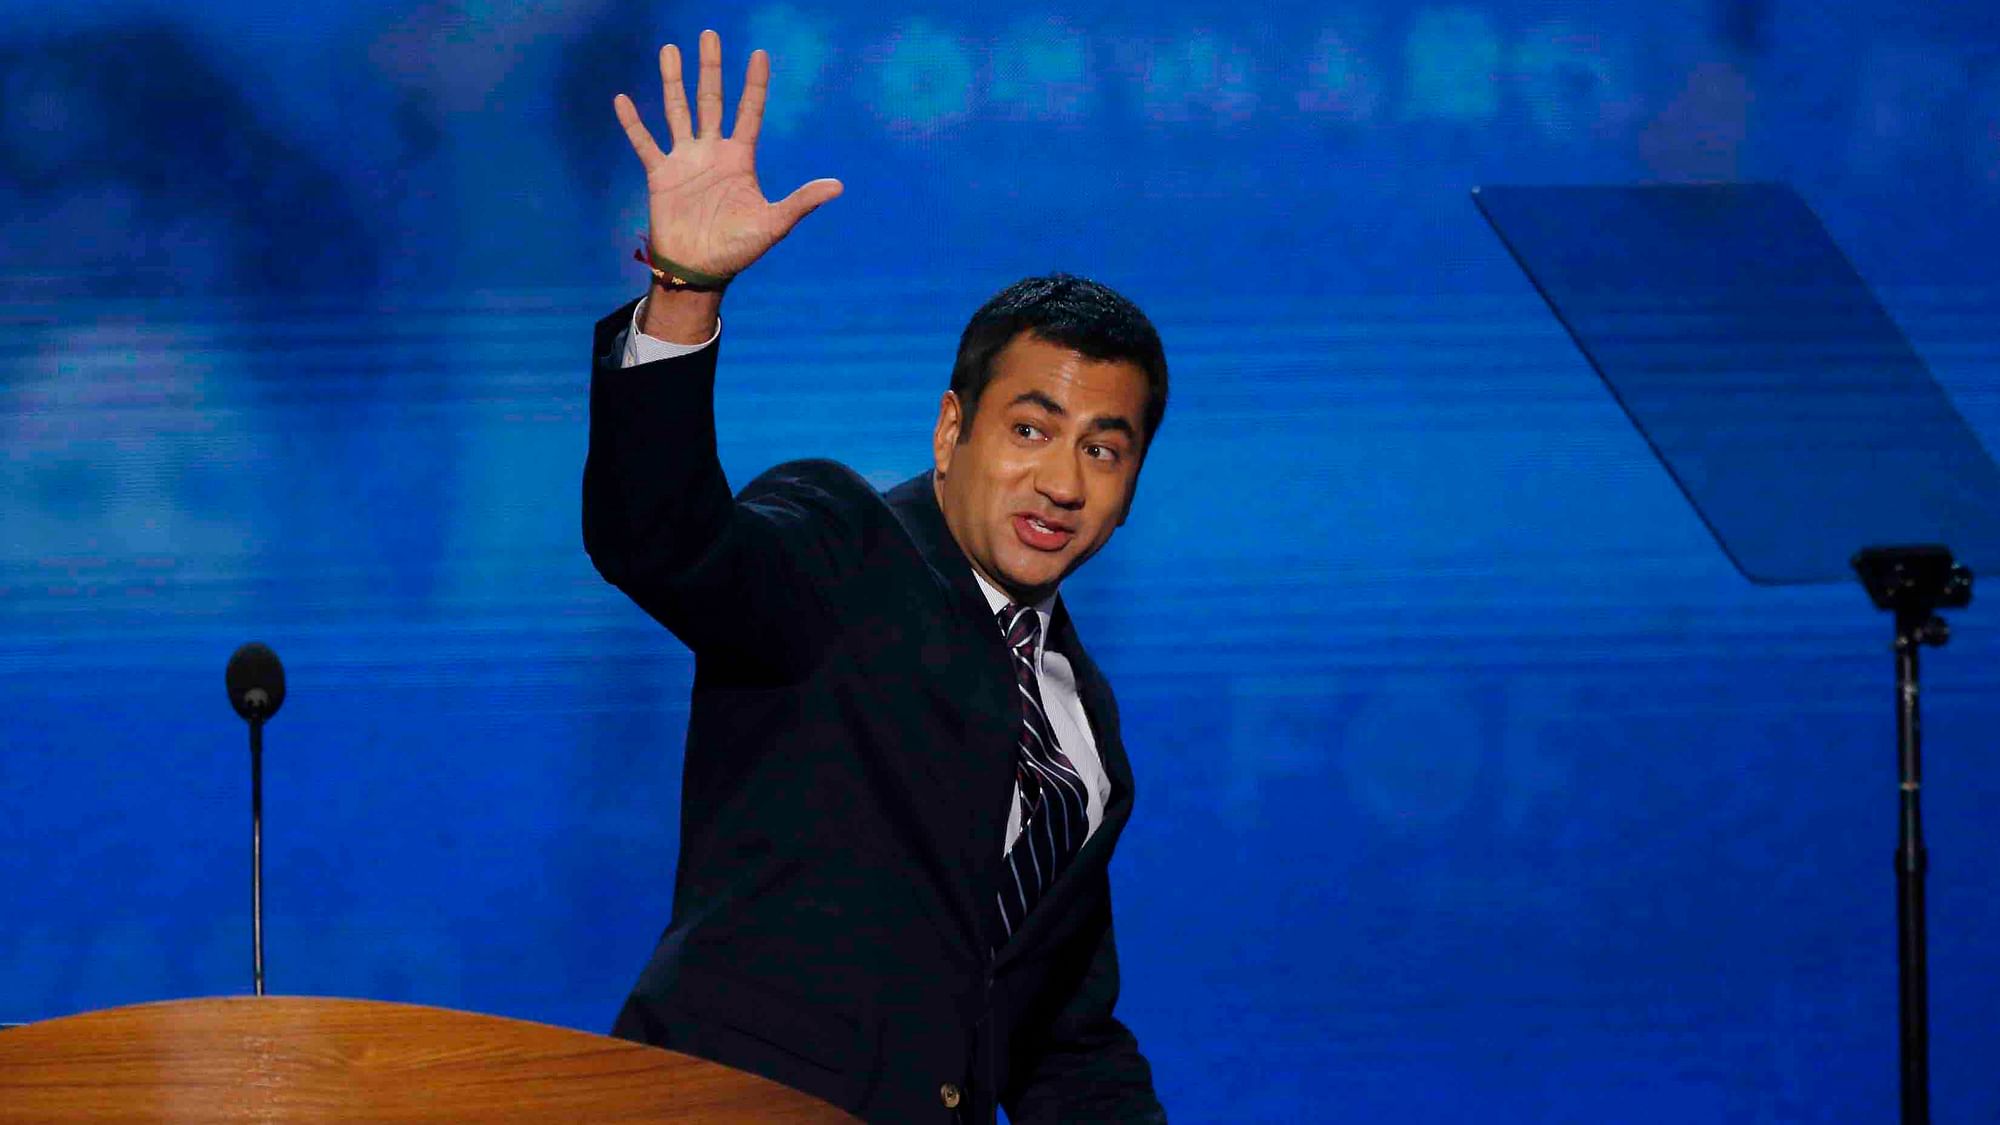 Actor Kal Penn waves after addressing delegates during the first day of the Democratic National Convention in Charlotte, North Carolina. (Photo: Reuters) 